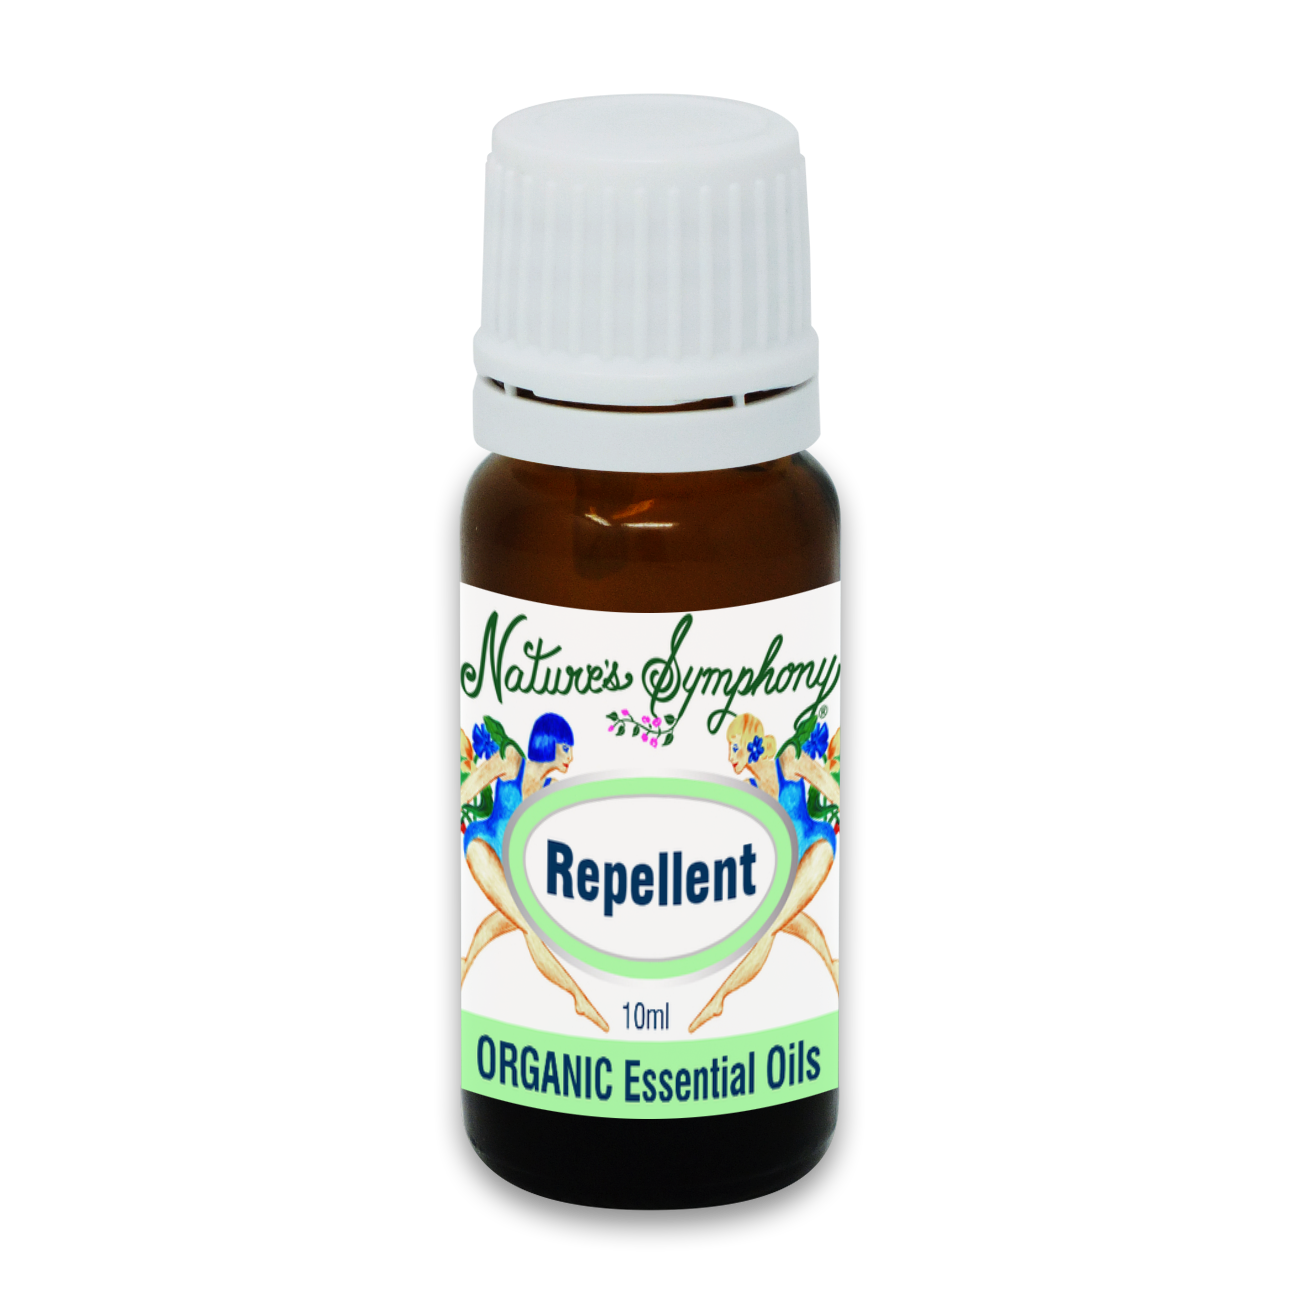 Repellent, Organic/Wildcrafted blend - 10ml